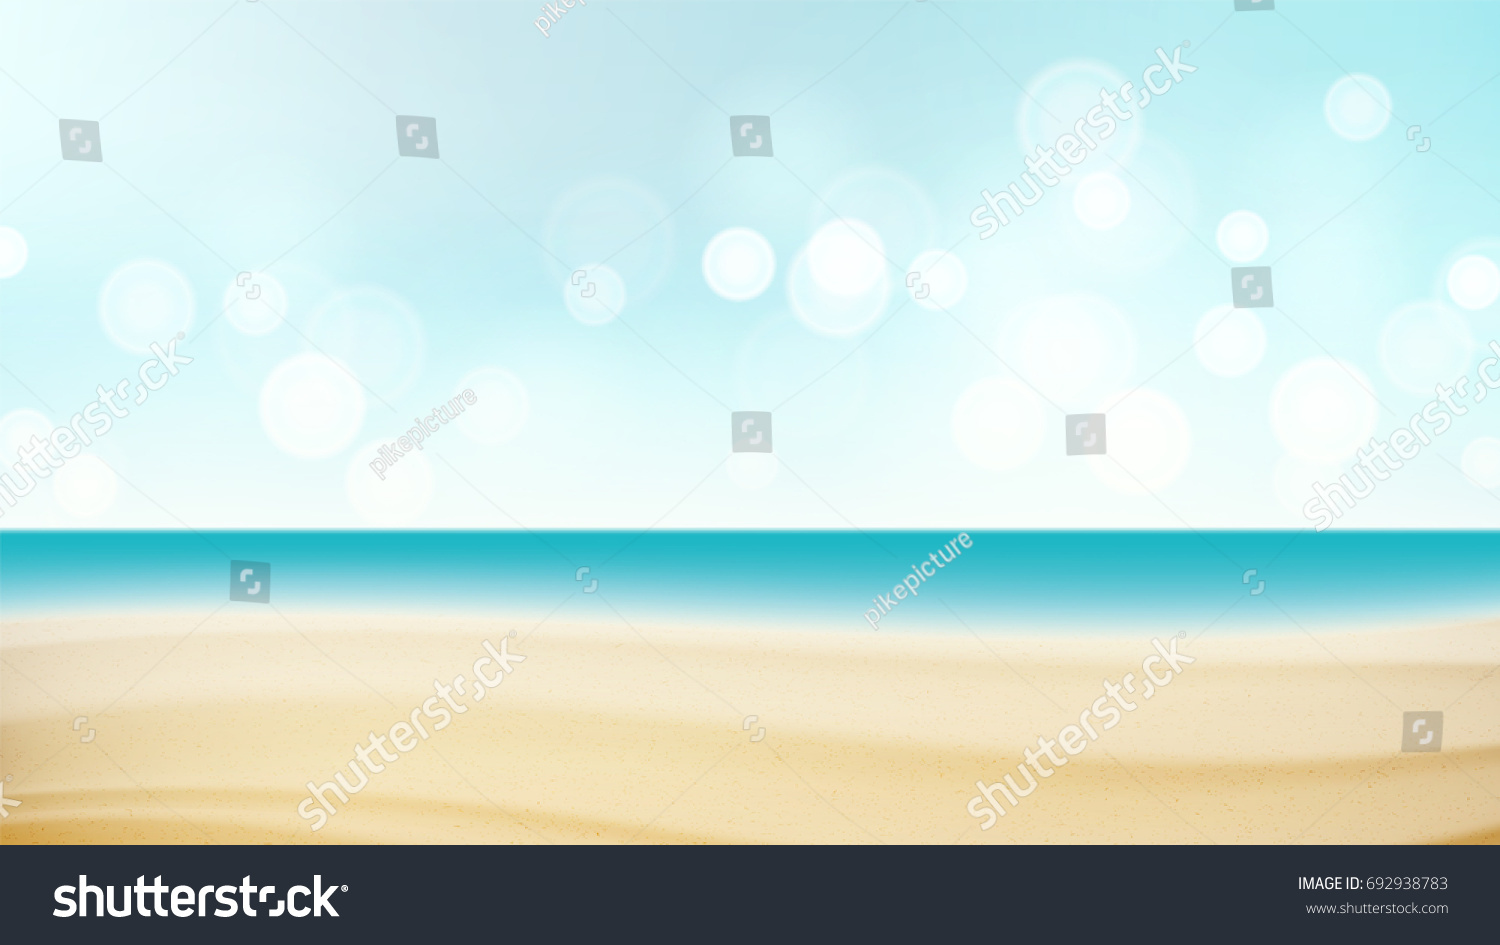 SVG of Beach Tropical Vector. Travel Seaside View Poster. Summer Holiday Vacation Concept. Ocean Illustration svg